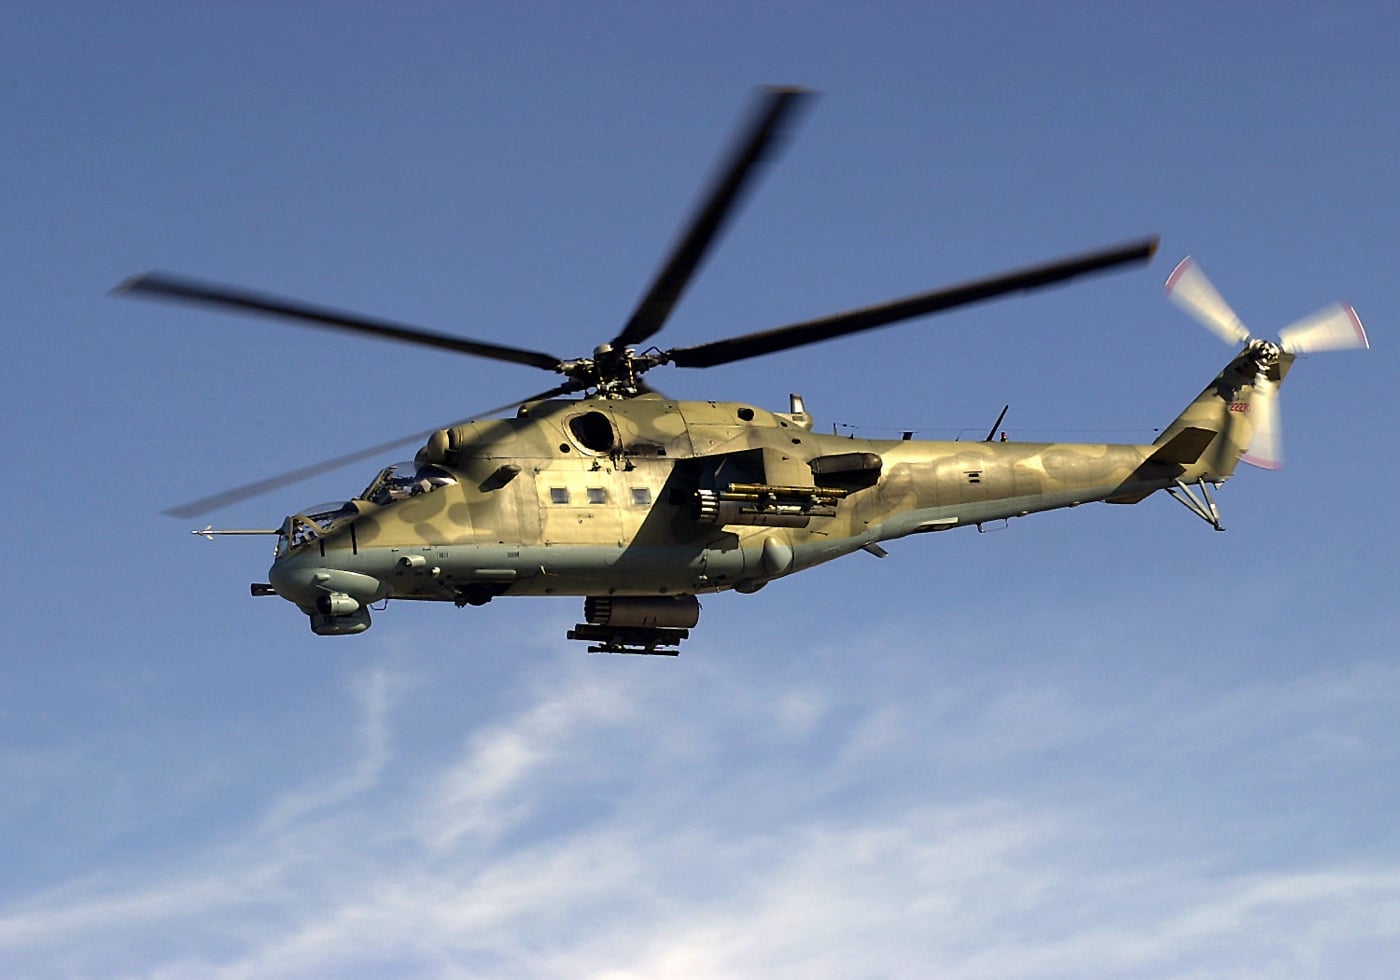 mi-24 operated by us army